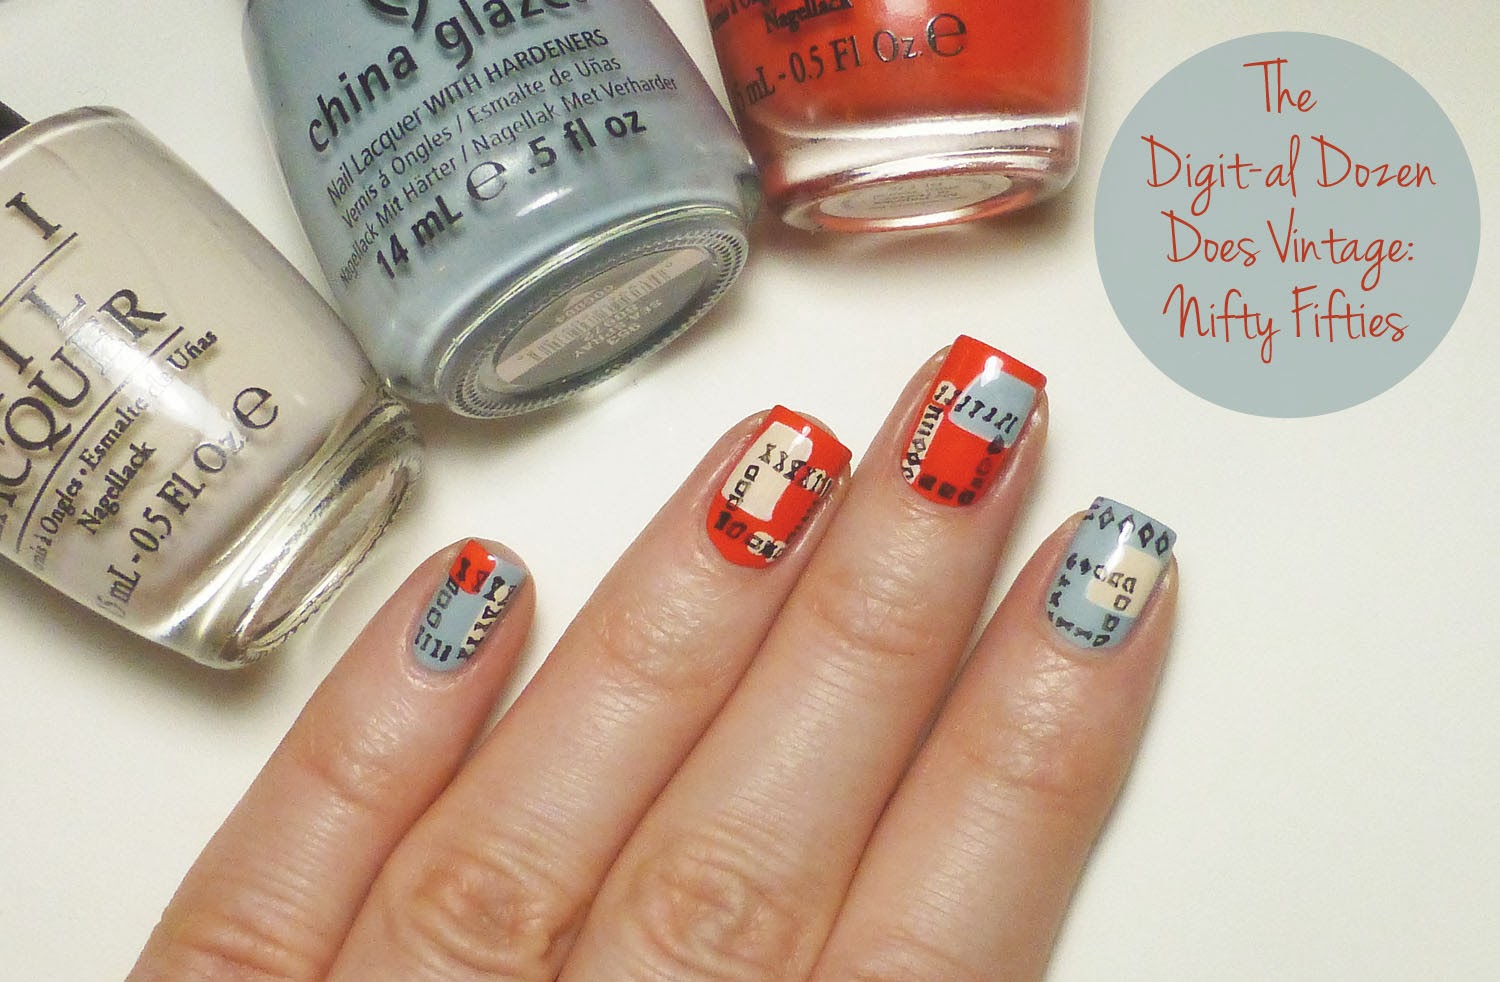 Will Paint Nails for Food: The Digit-al Dozen Does Vintage: Nifty Fifties